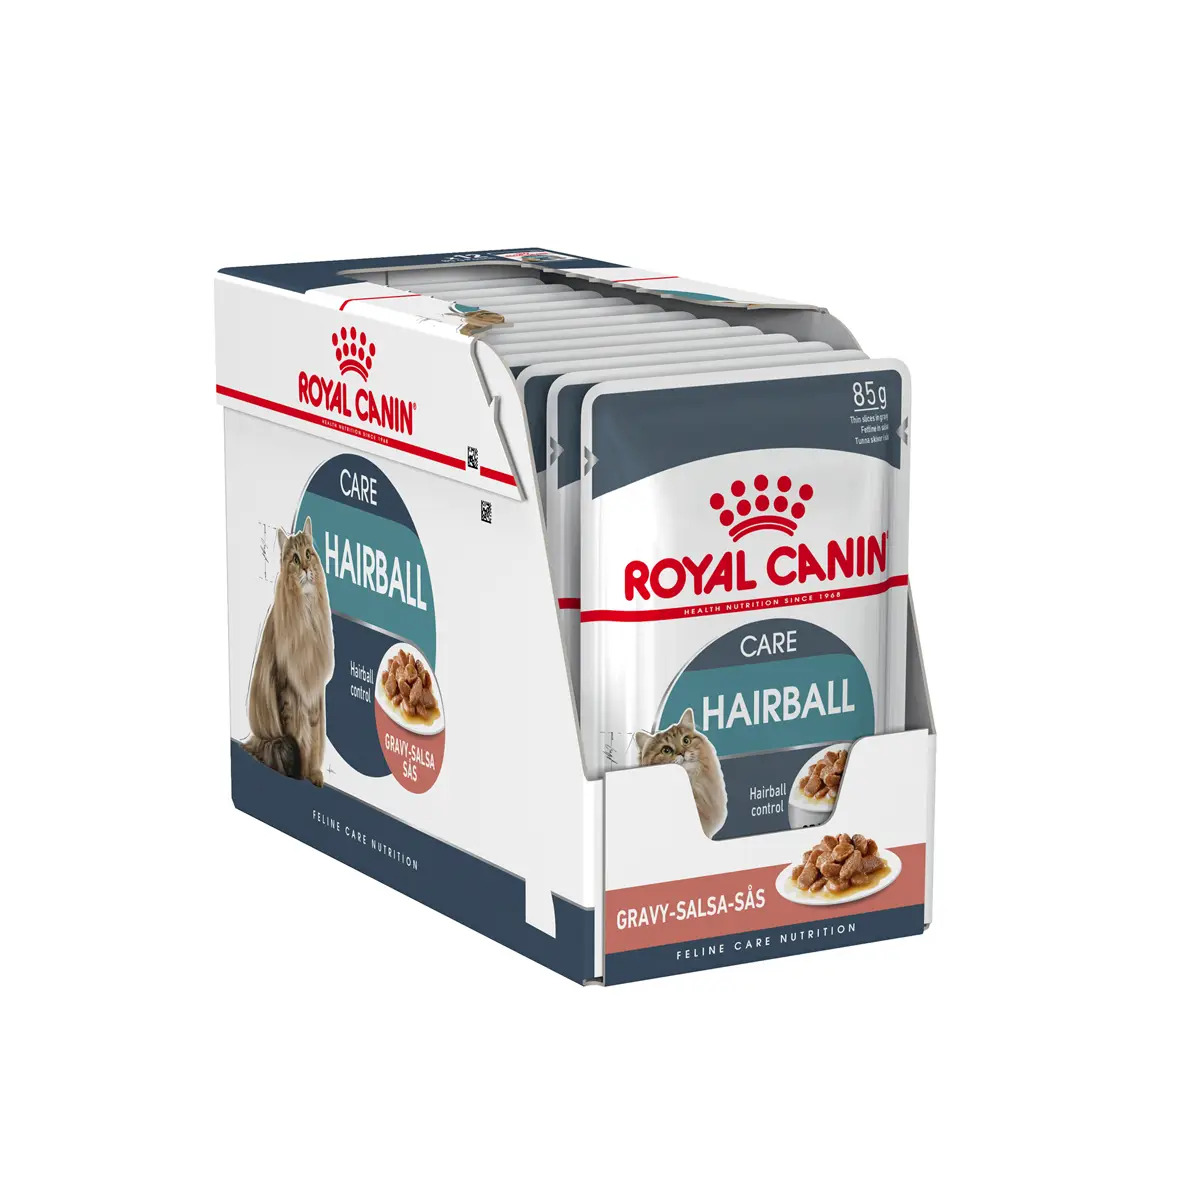 Royal Canin - Care Hairball Cat Food In Gravy 85g